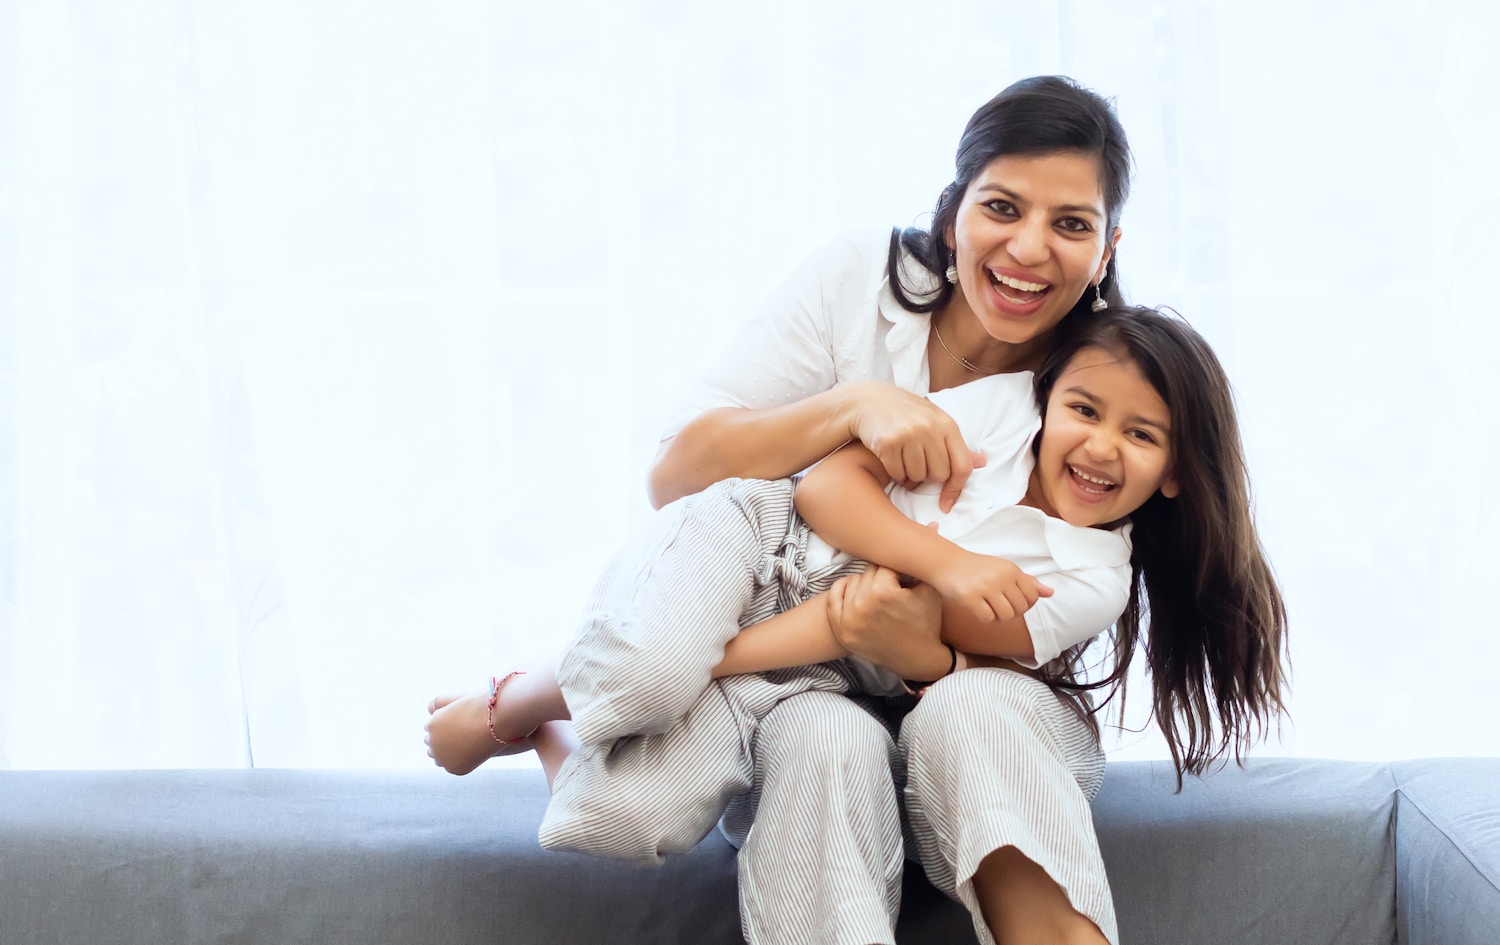 Indexed universal life insurance for permanent family protection